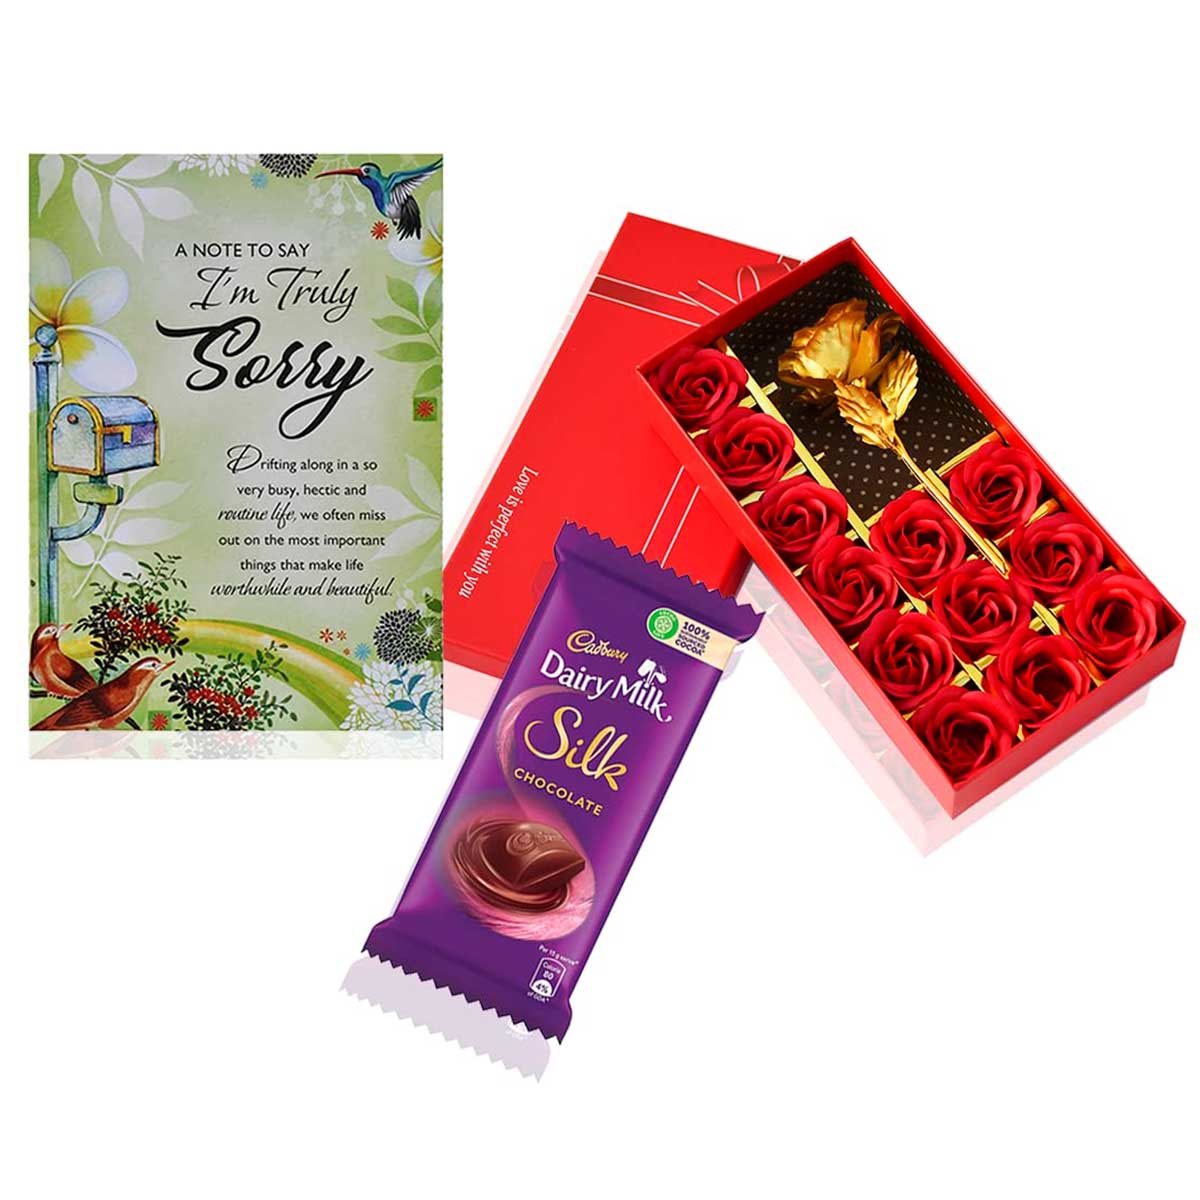 Saugat Traders Sorry Gift Combo - Greeting Card with Chocolate & Teddy Bear  - Apology Gifts - Sorry Gift for Friend - Girlfriend/Boyfriend - Best  Friend : Amazon.in: Grocery & Gourmet Foods